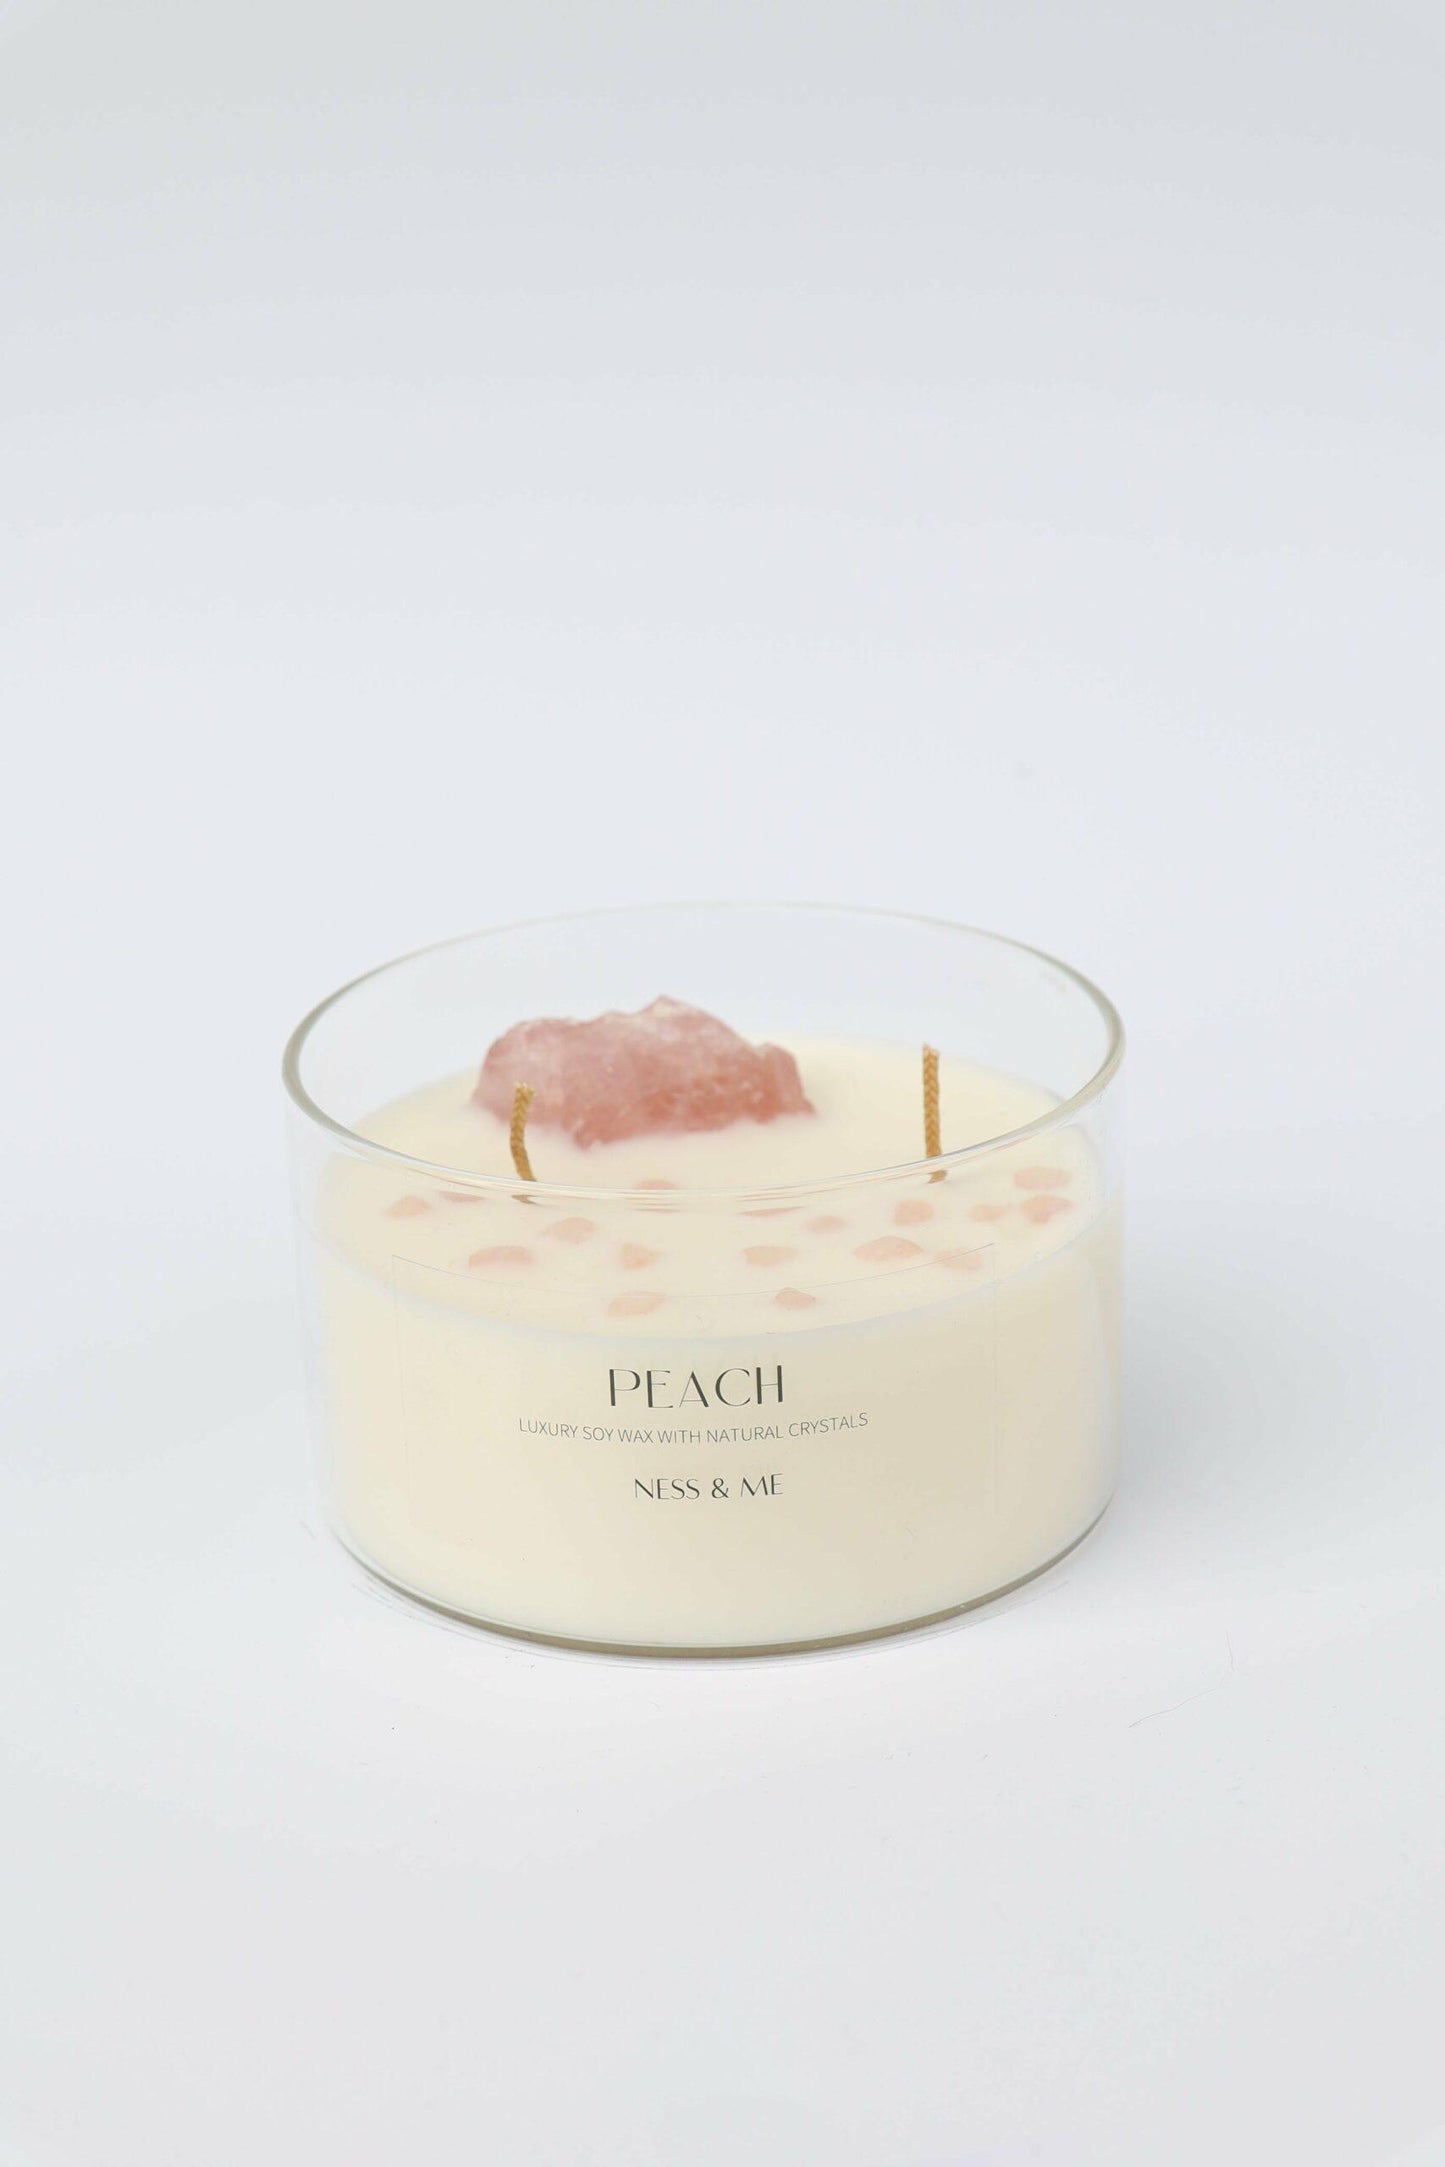 Ness & Me Luxury 2- Wick Crystal Soy Wax Candle 280g - Peach